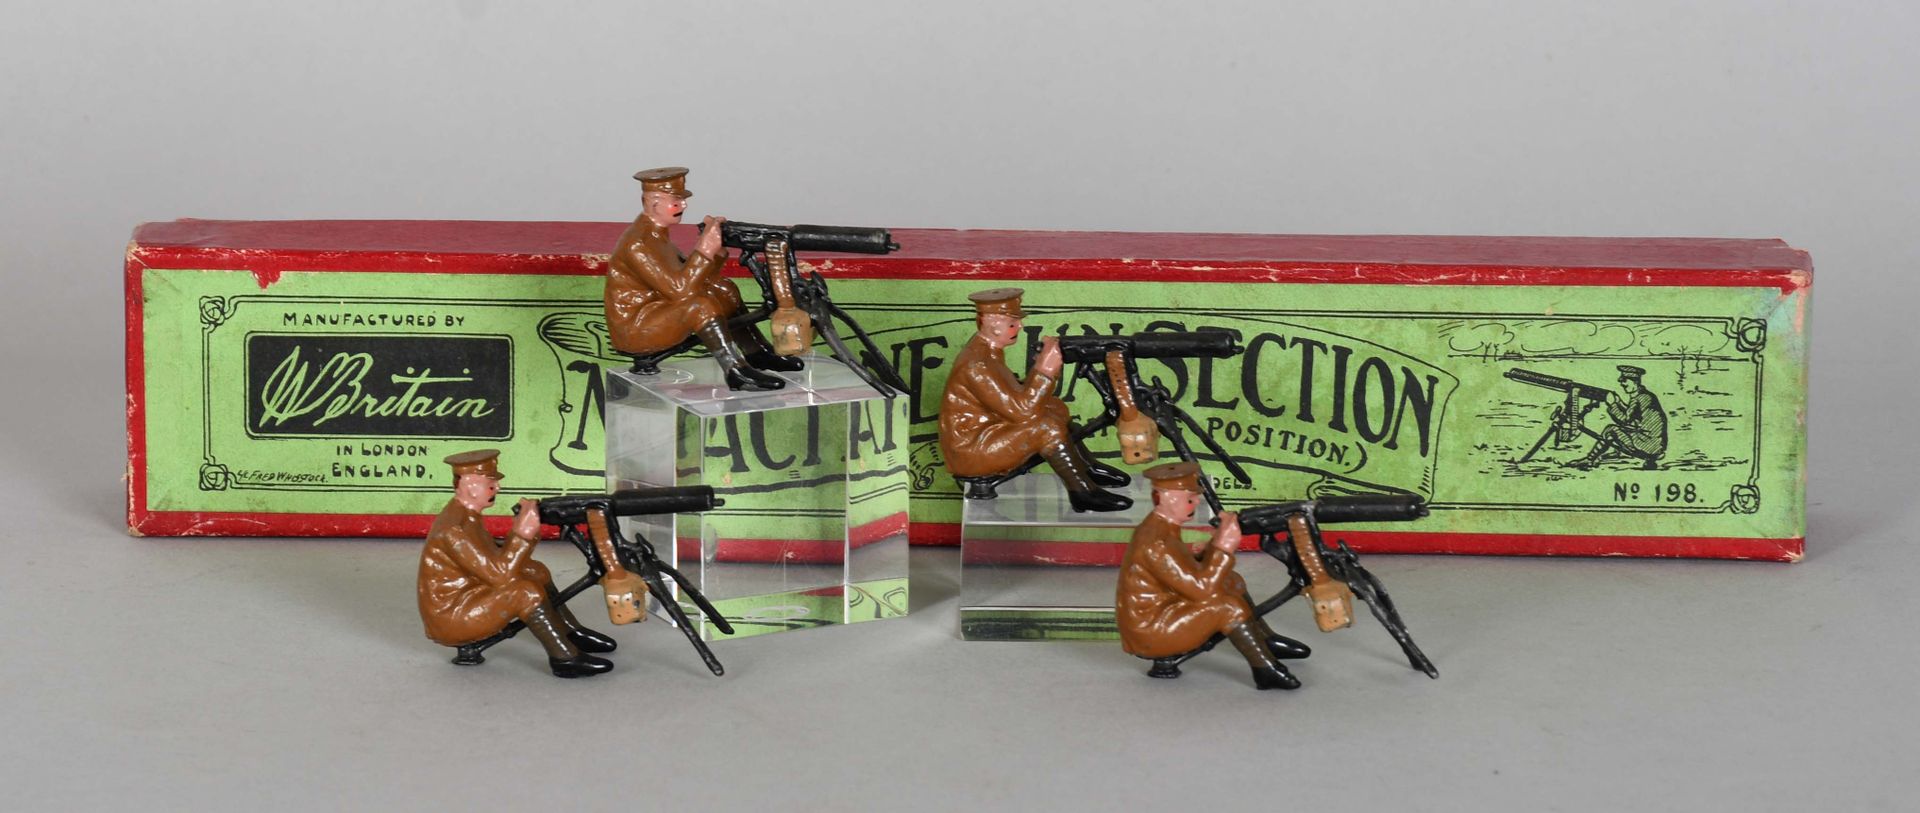 Null Machine Gun Section / W. Britain

Four painted lead figures. In box.